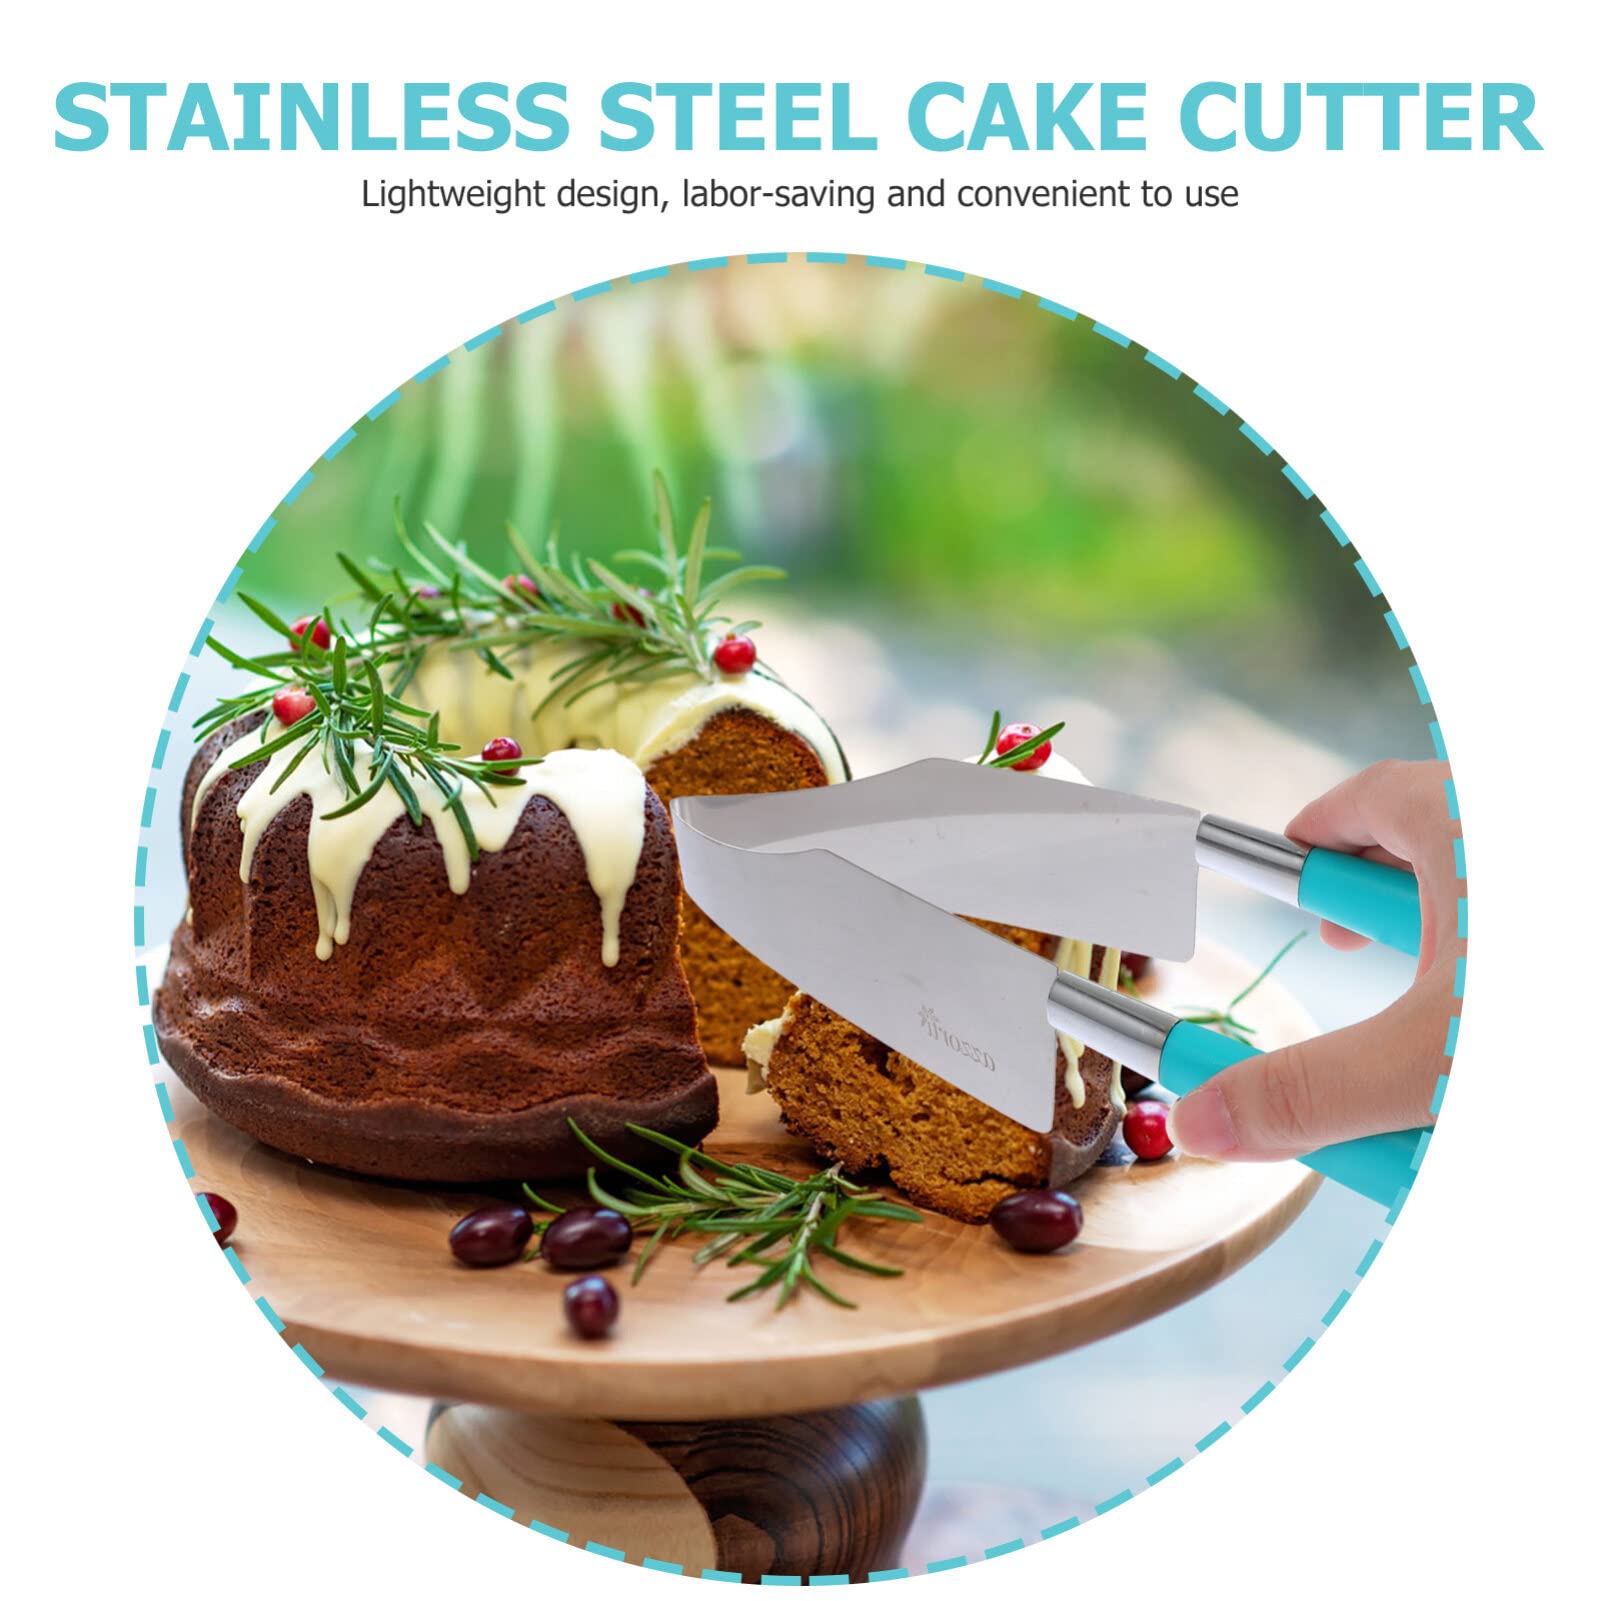 2Pcs Cake Slicer Cutters, Stainless Steel Cake Slicer, Better Quality and More Stable Cake Lifter Tools Pie Knife, Cake Pie Cutting for Cakes, Pie, Desserts Bread and Pizza (Random Color)